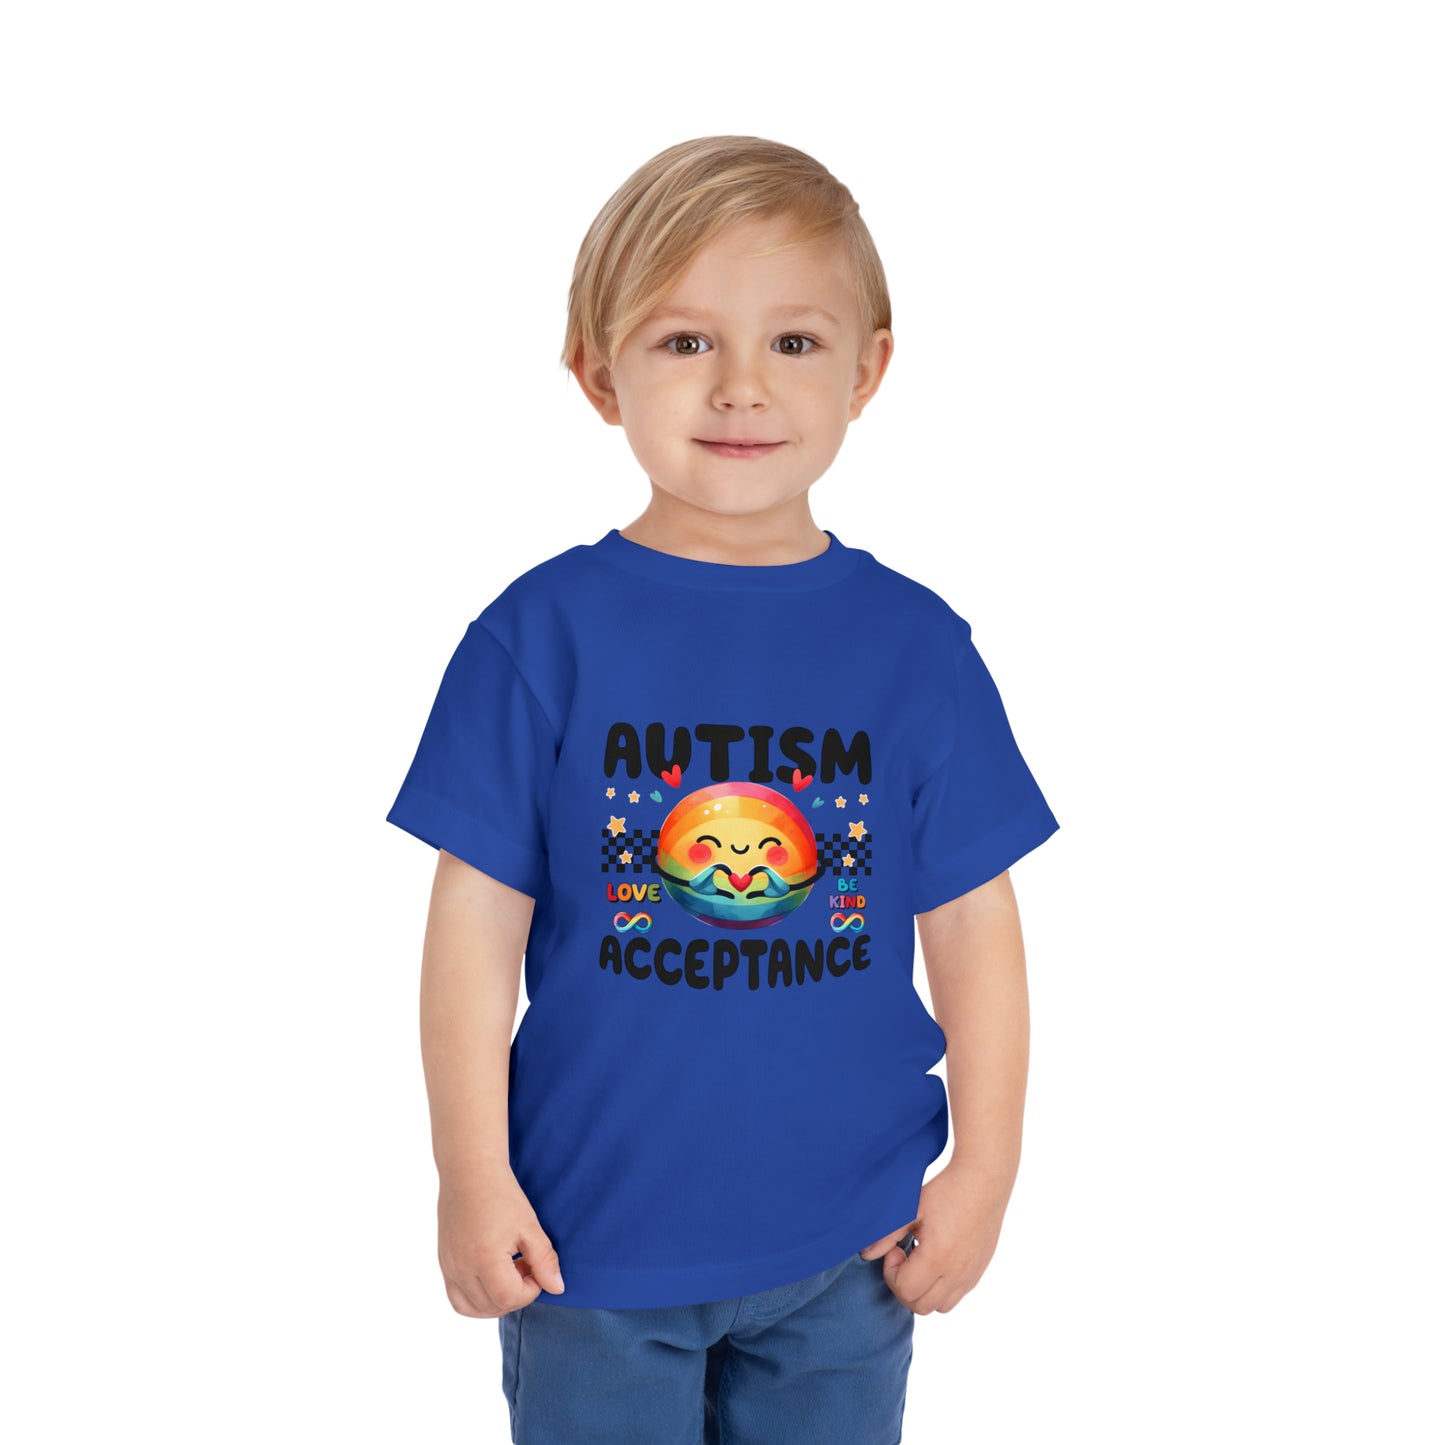 Autism Acceptance Awareness Advocate Toddler Short Sleeve Tee